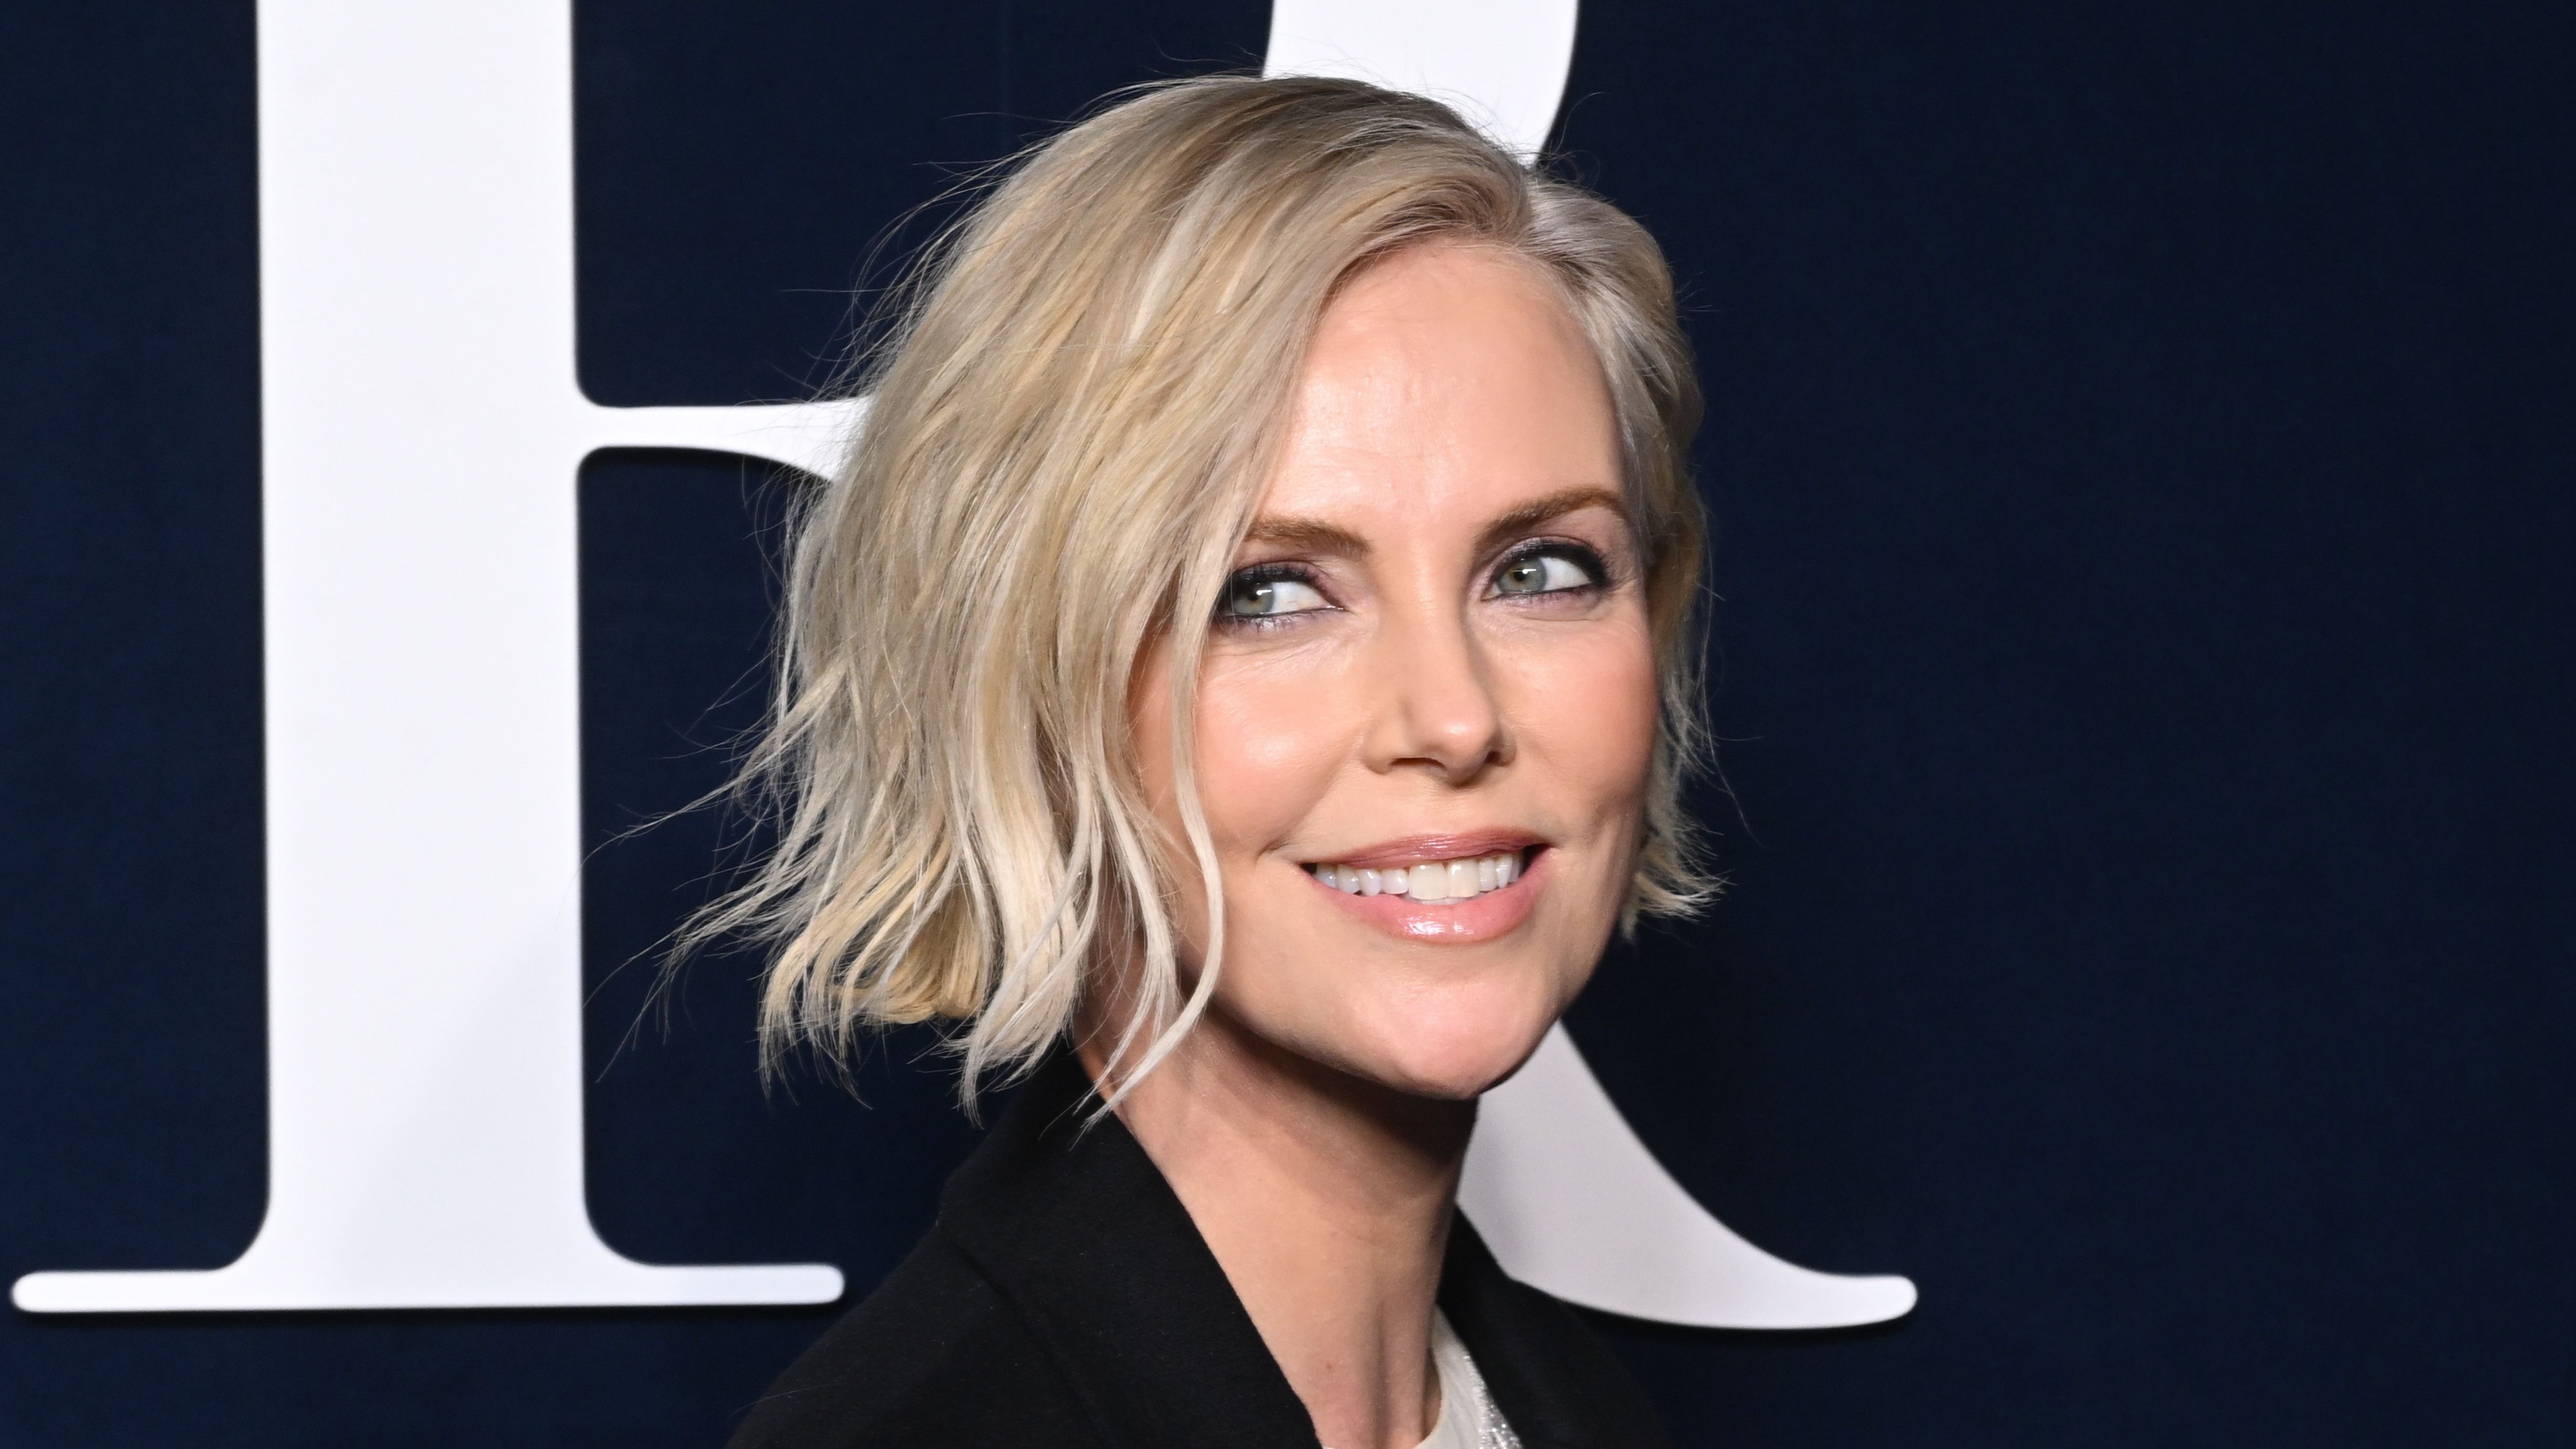 4905px x 2759px - Charlize Theron Went Pantsless On IG, And Her Mile-Long Are Killer